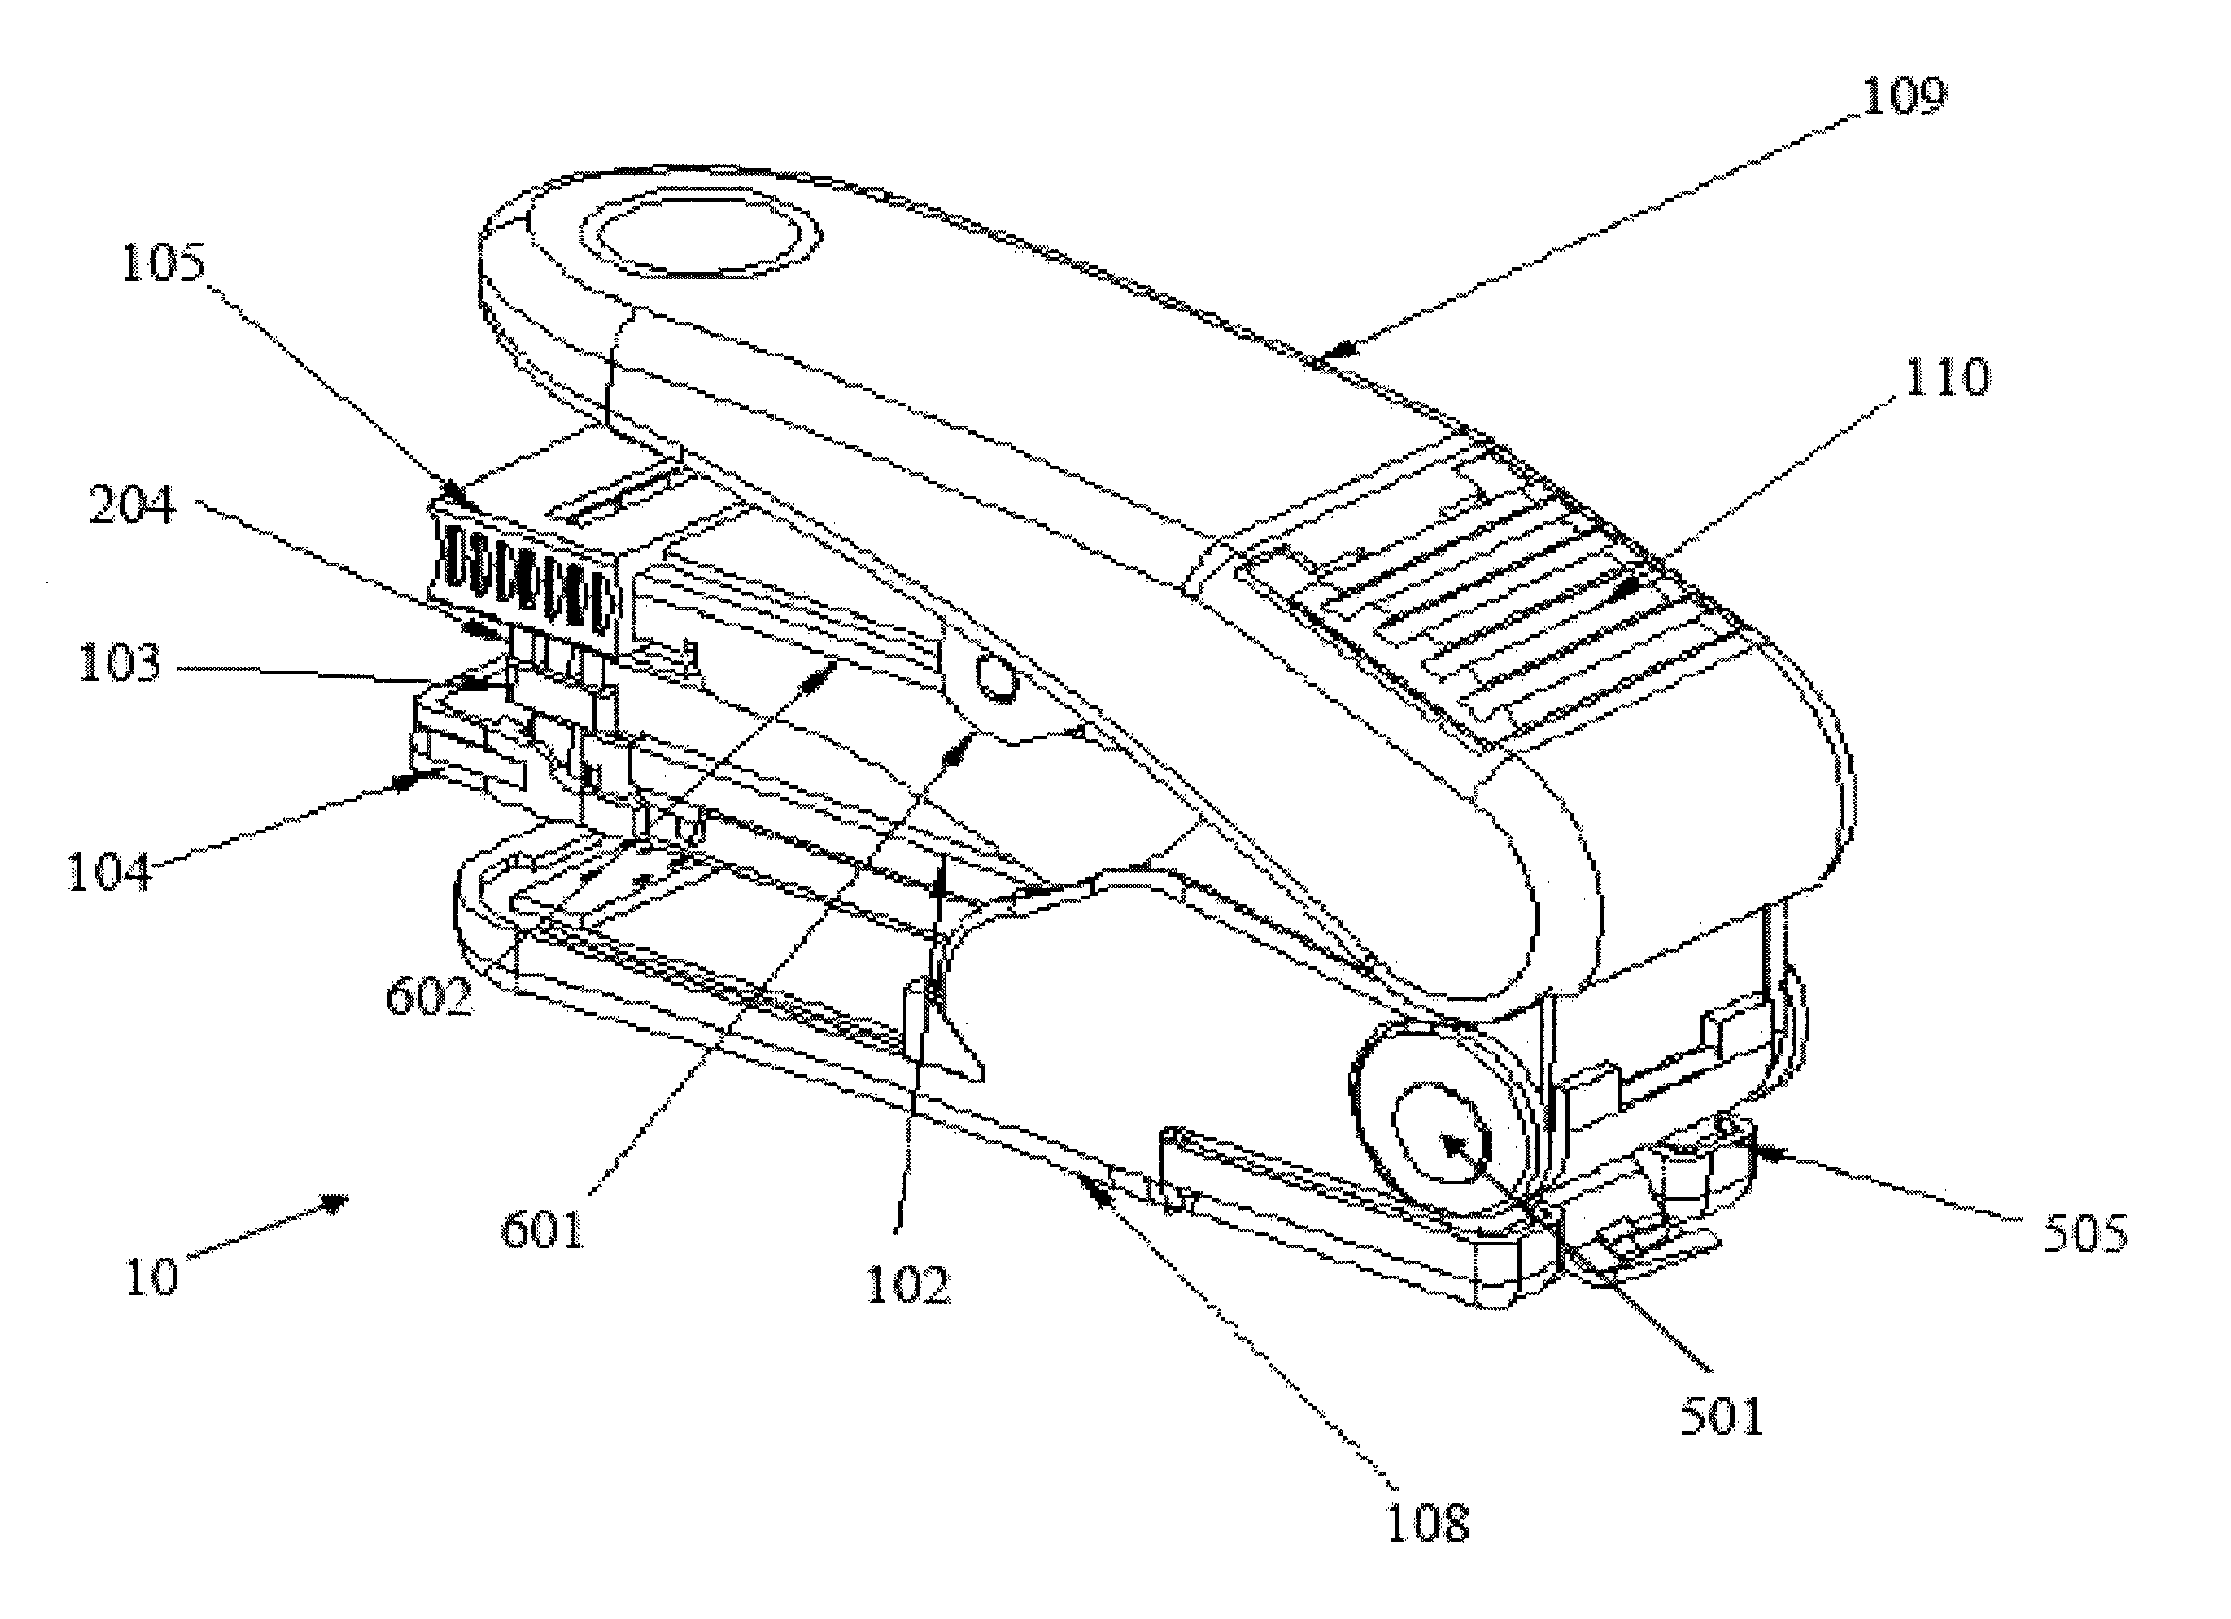 Stapler switchable between various operation modes and switching method thereof